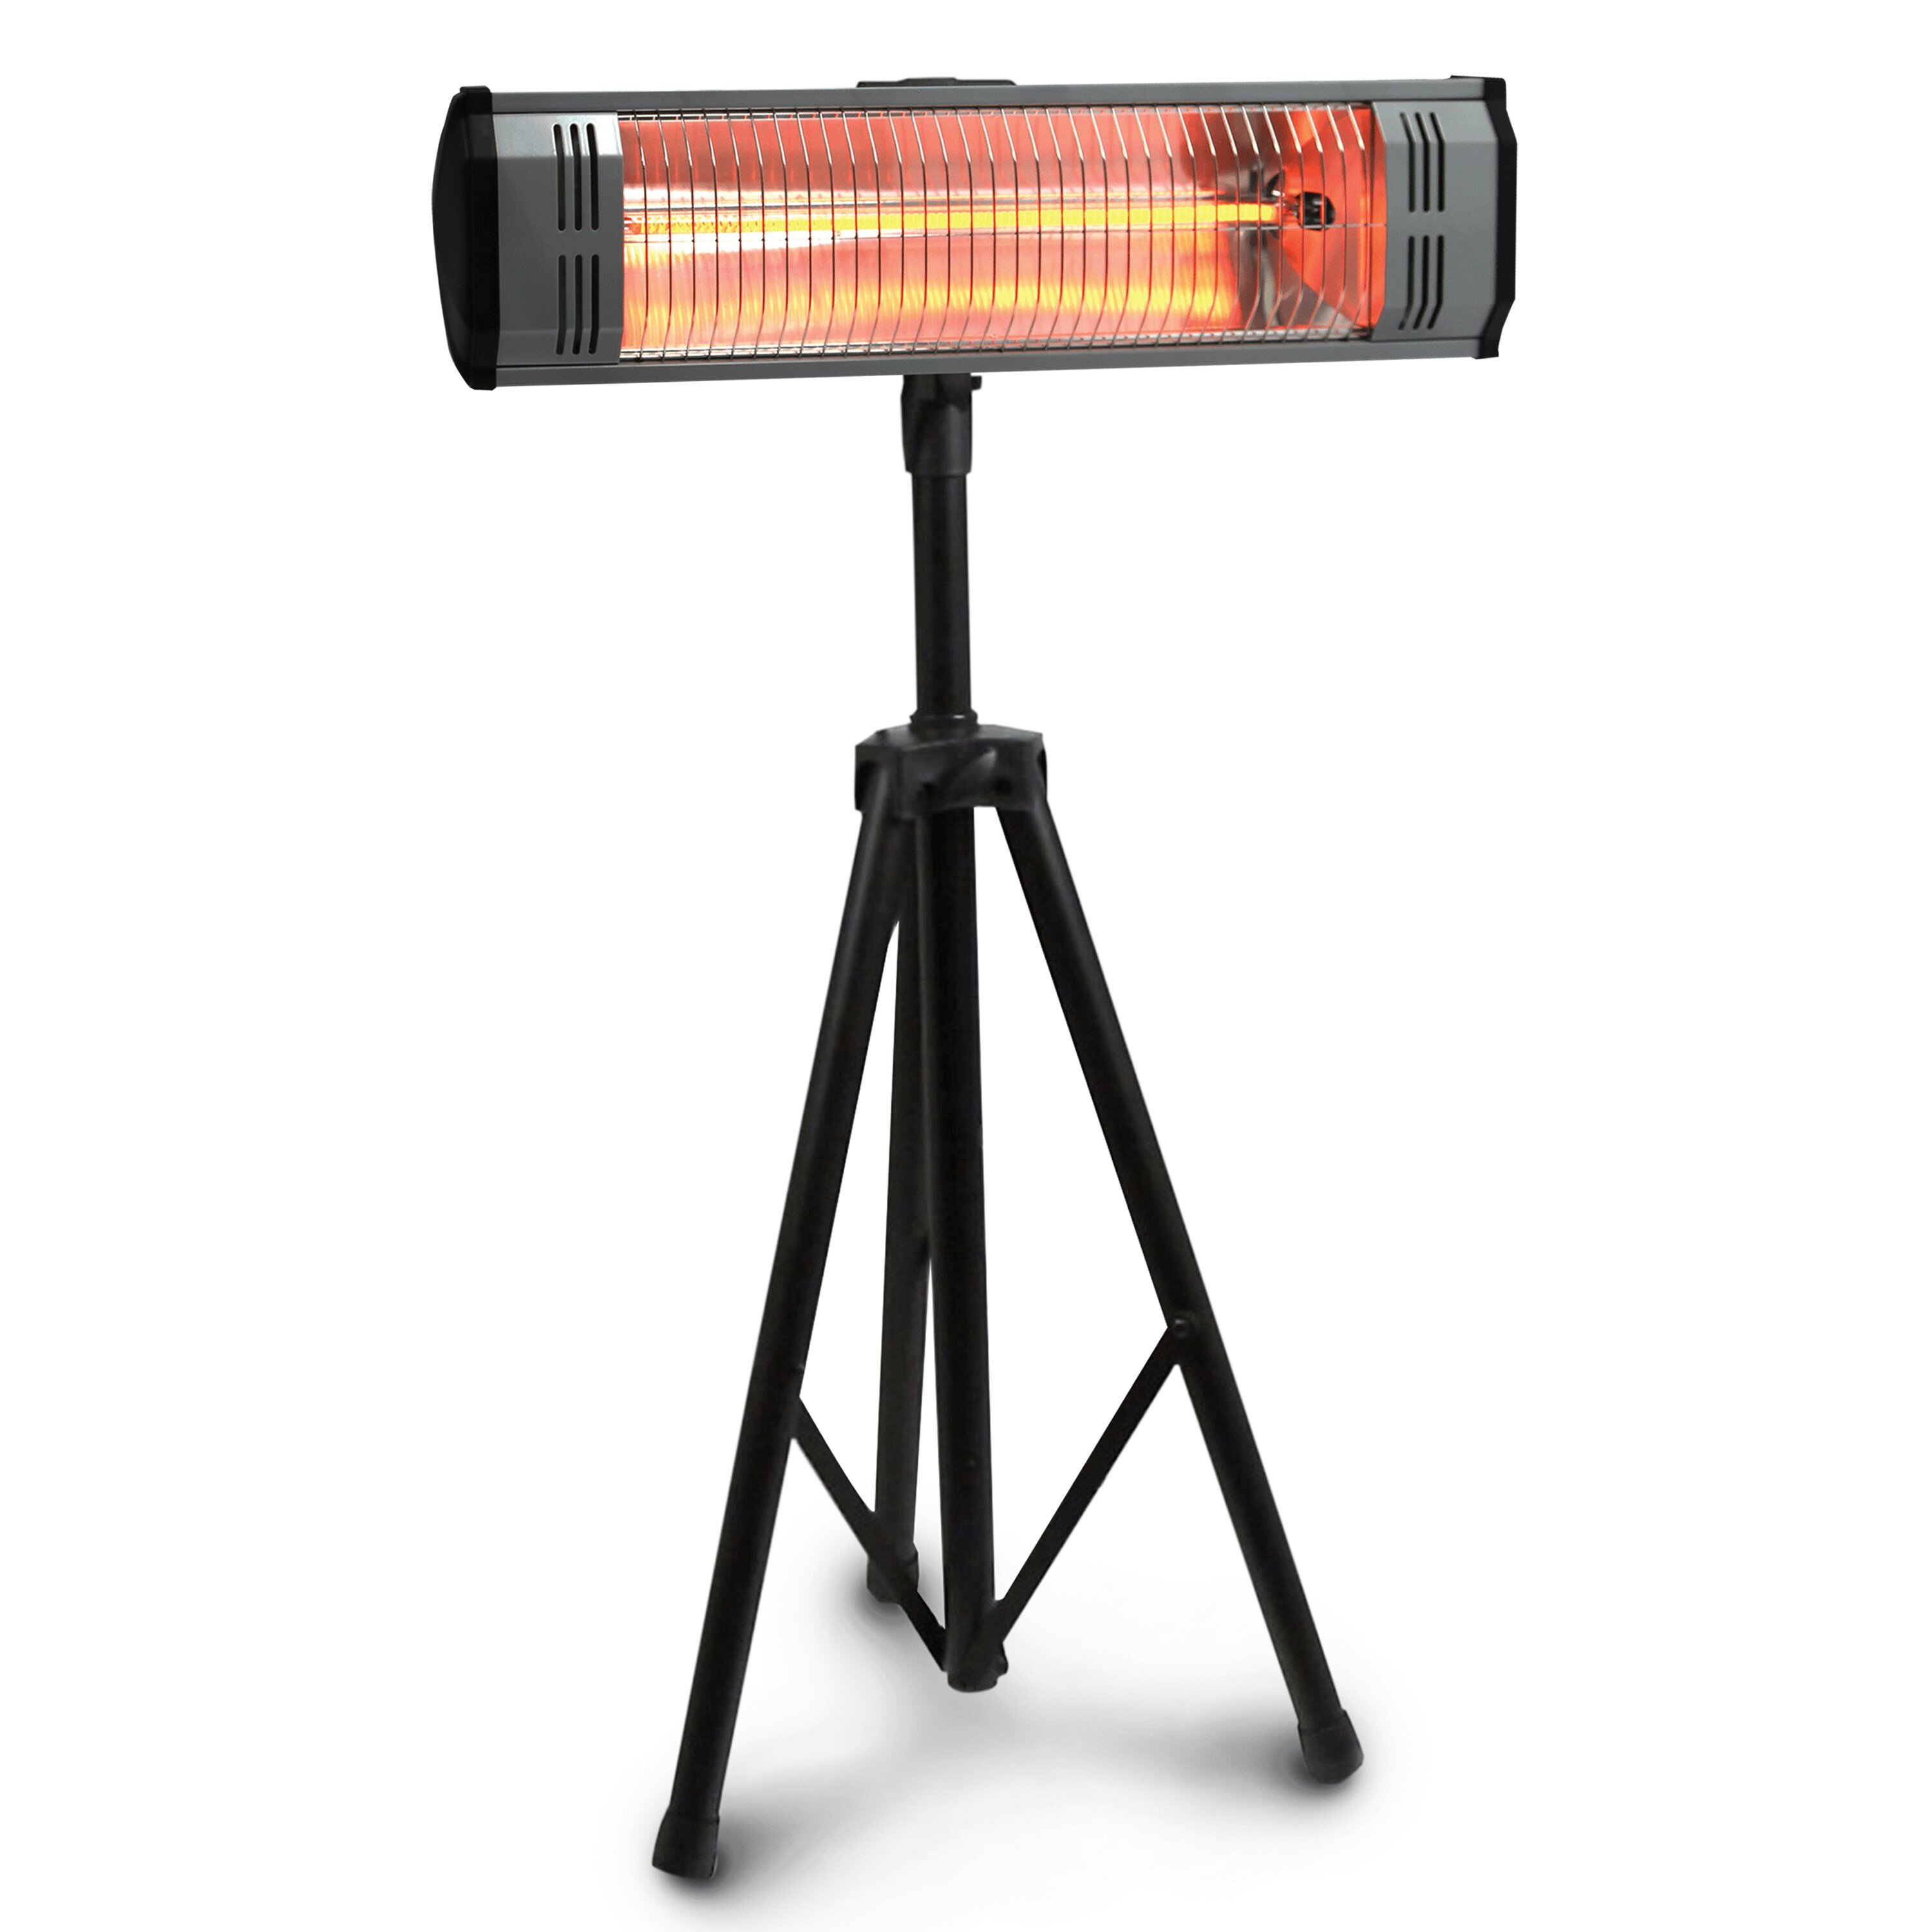 Electric Hanging Ceiling Patio Heater,2KW Infrared Space Heaters with Remote Control and 3 Power Settings for Indoor Outdoor Garden 